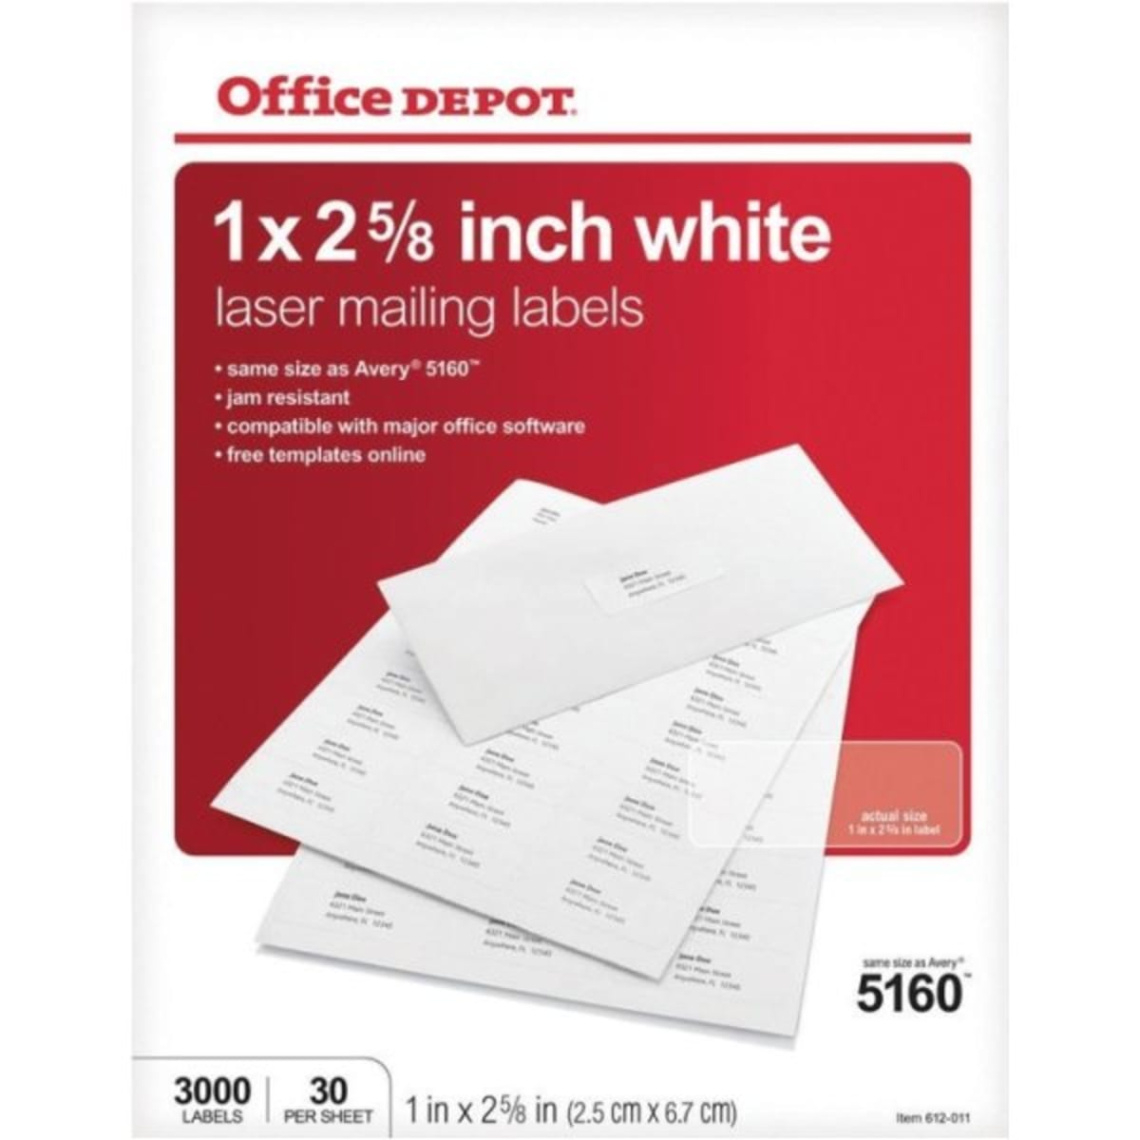 printable office depot address labels 1 x 2 5/8 template